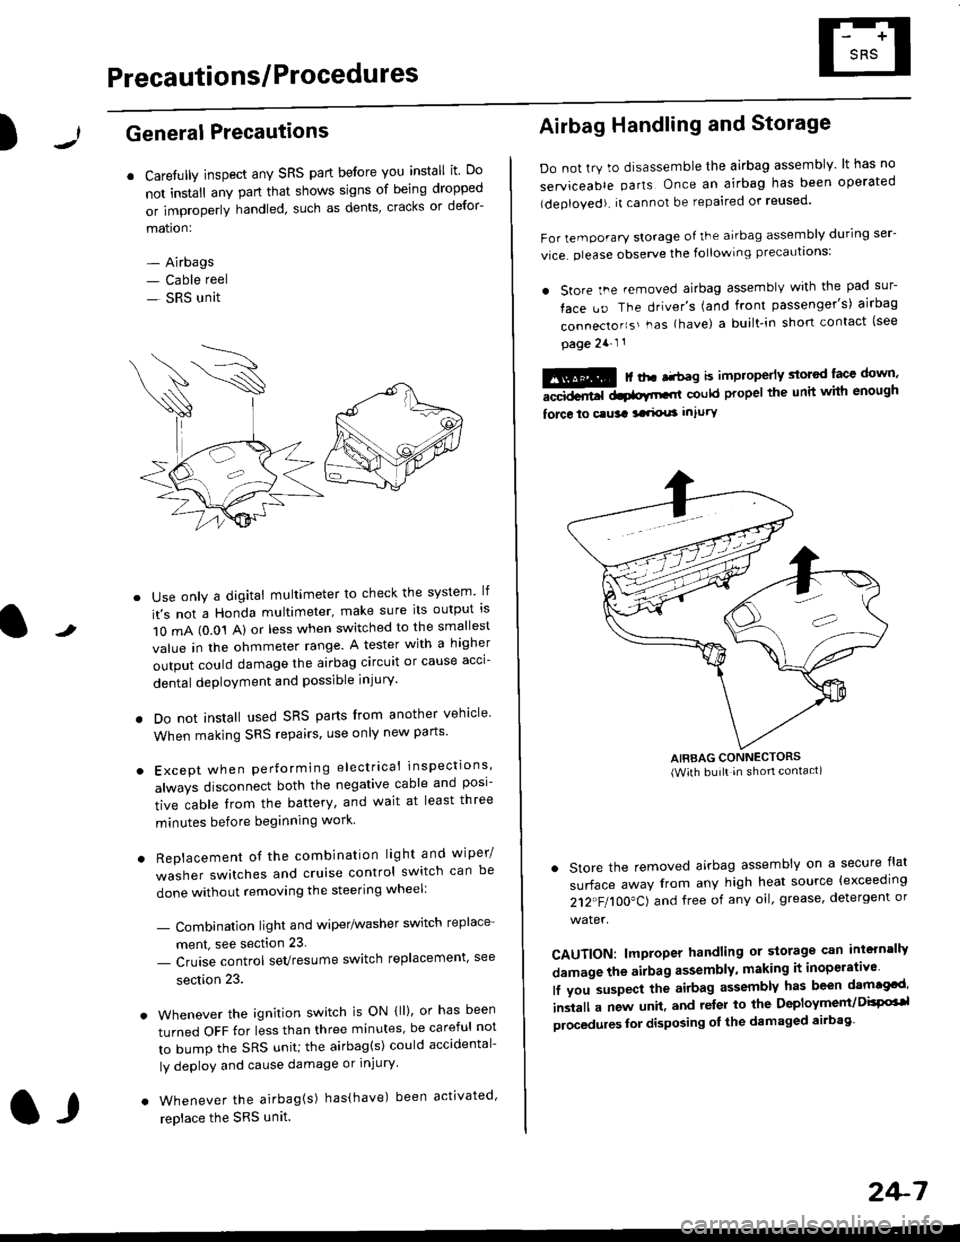 HONDA CIVIC 1998 6.G Workshop Manual Precautions/ Procedures
)General Precautions
r Carefully inspect any SRS part before you install it Do
not install any part that shows signs of being dropped
or improperly handled such as dents, crac